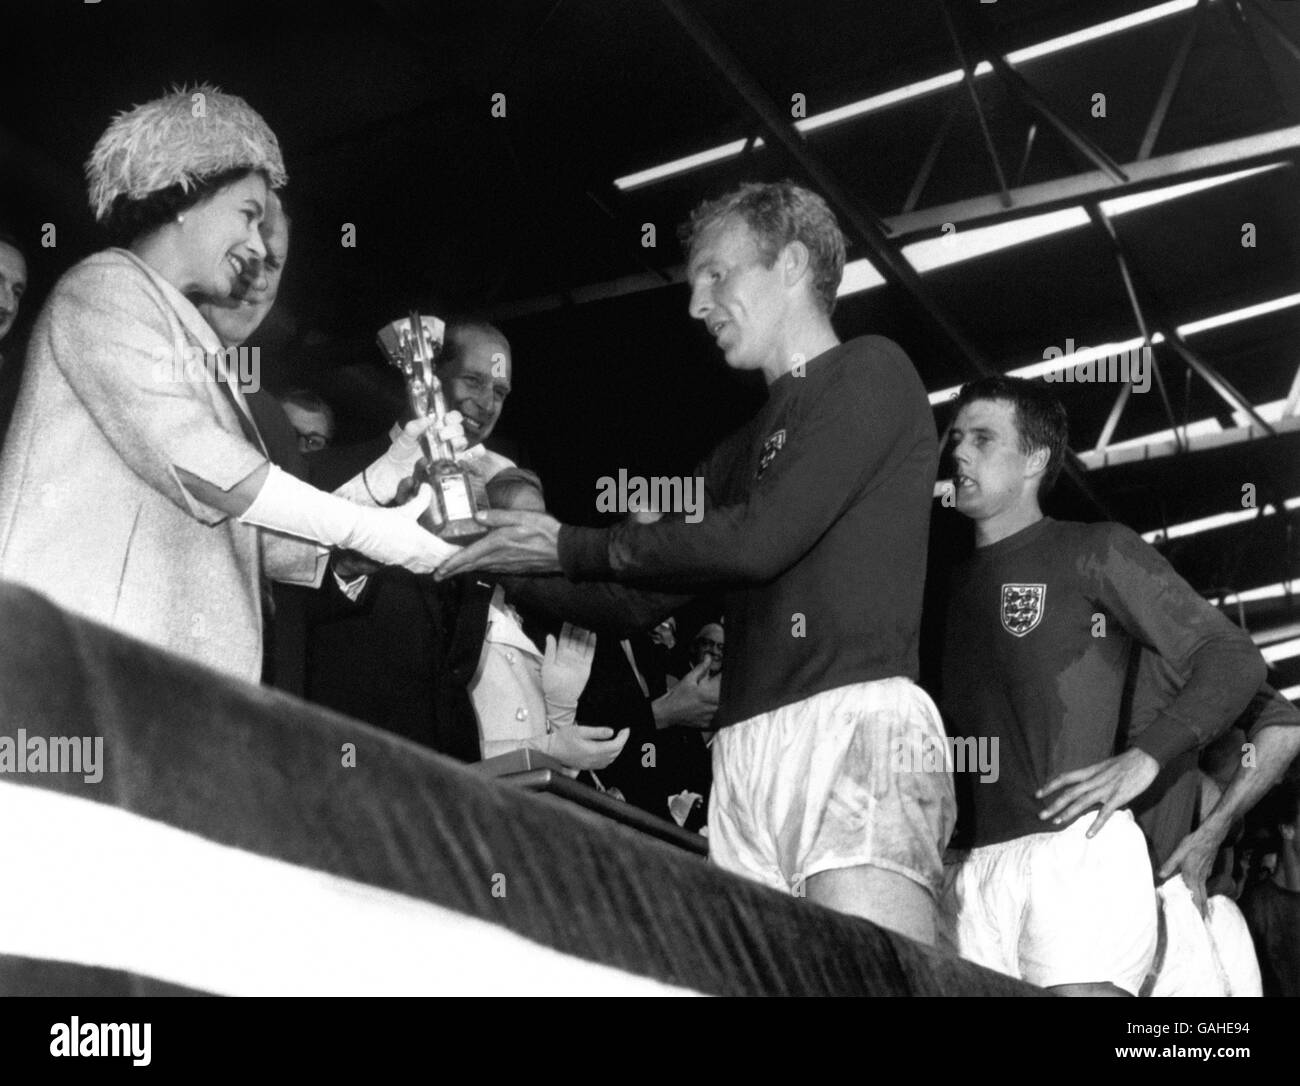 England v West Germany - 1966 World Cup Final - Wembley Stadium. England captain Bobby Moore is presented with the Jules Rimet trophy by Her Majesty The Queen as teammate Geoff Hurst (r) looks on in awe Stock Photo